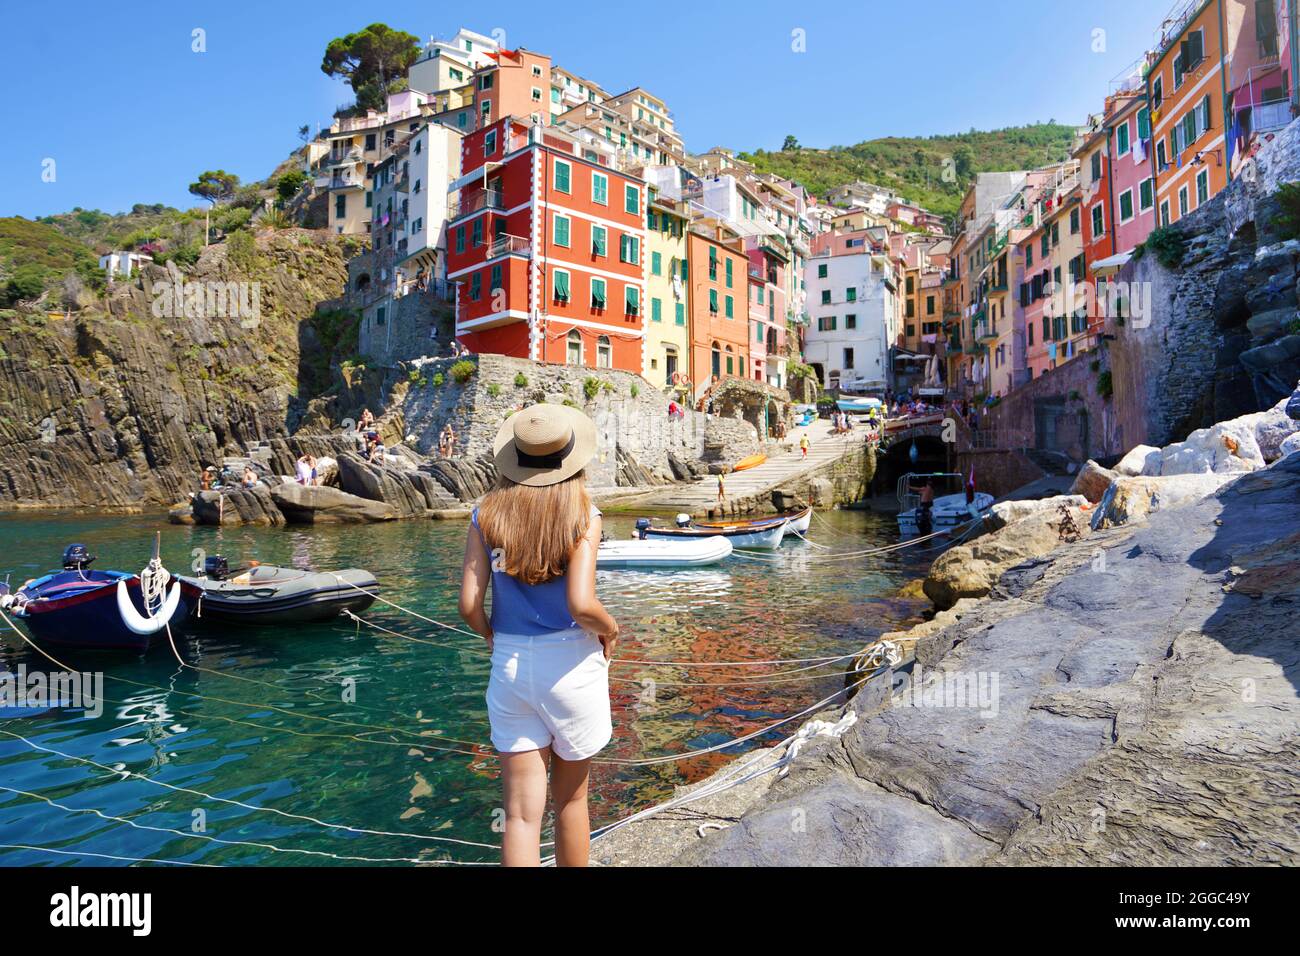 Vacation in Europe. Beautiful woman walking in Riomaggiore harbor looking at picturesque village overhanging cliffs, Cinque Terre, Italy. Stock Photo